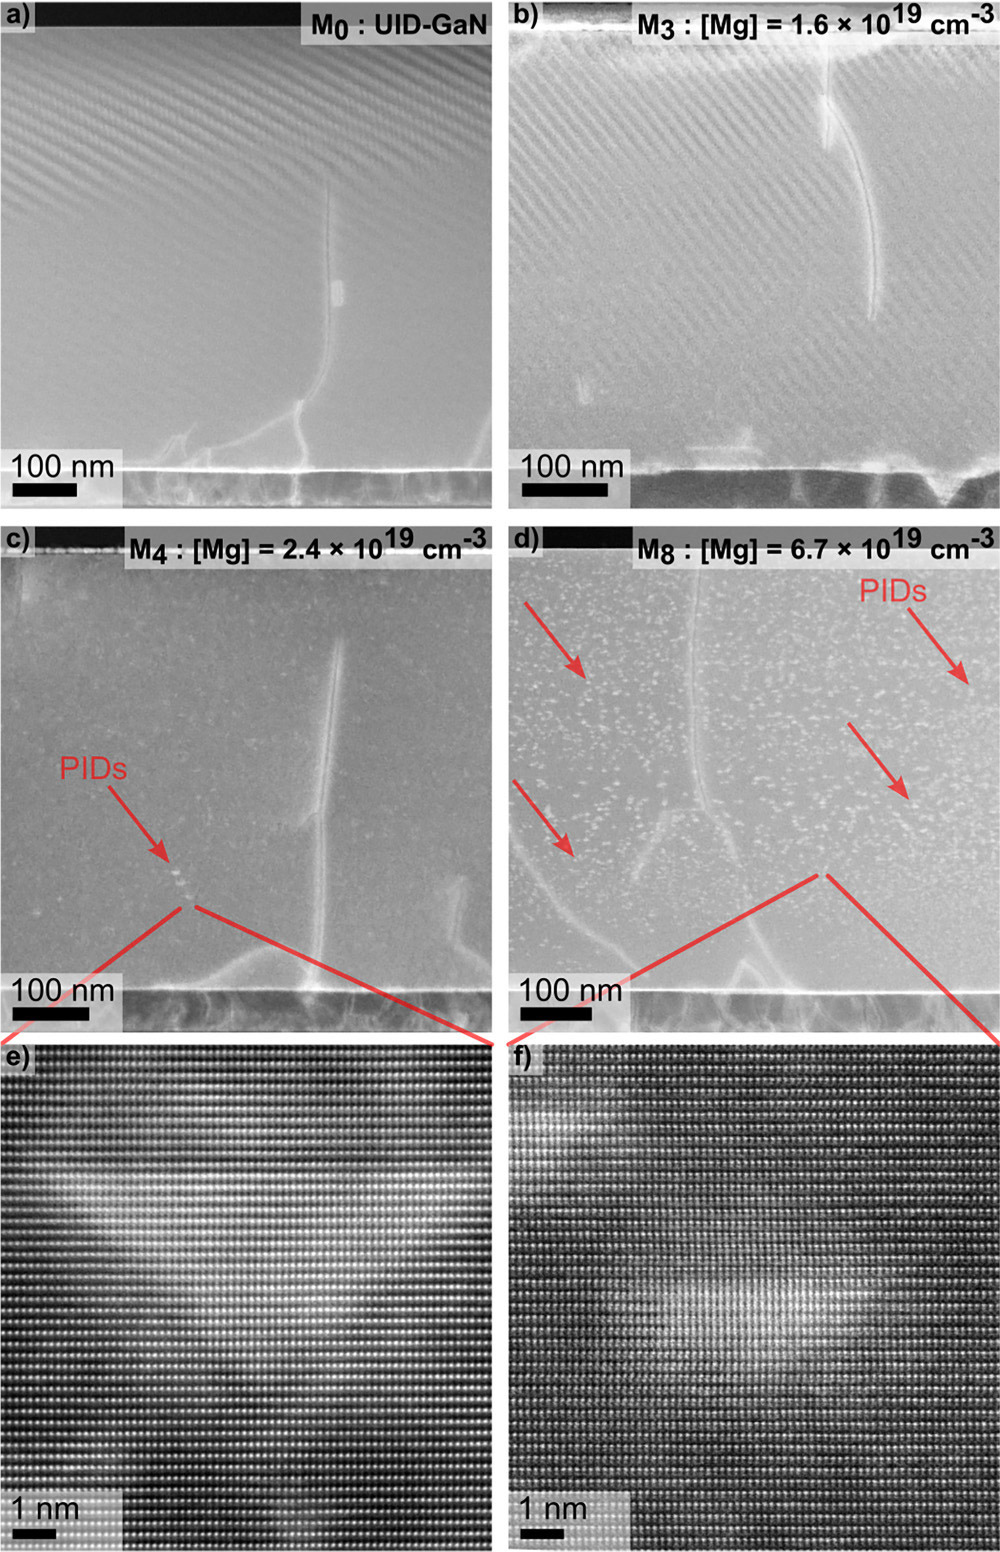 Figure 2: Scanning transmission electron microscope (STEM) images of as-grown GaN:Mg layers with different [Mg]: (a) UID, (b) 1.6x1019/cm3, (c) 2.4x1019/cm3, and (d) 6.7x1019/cm3. Arrows in (c) and (d) highlight some PIDs. Higher-magnification images of PIDs for (c) and (d) shown in (e) and (f ), respectively, both in [1-100] projection. 